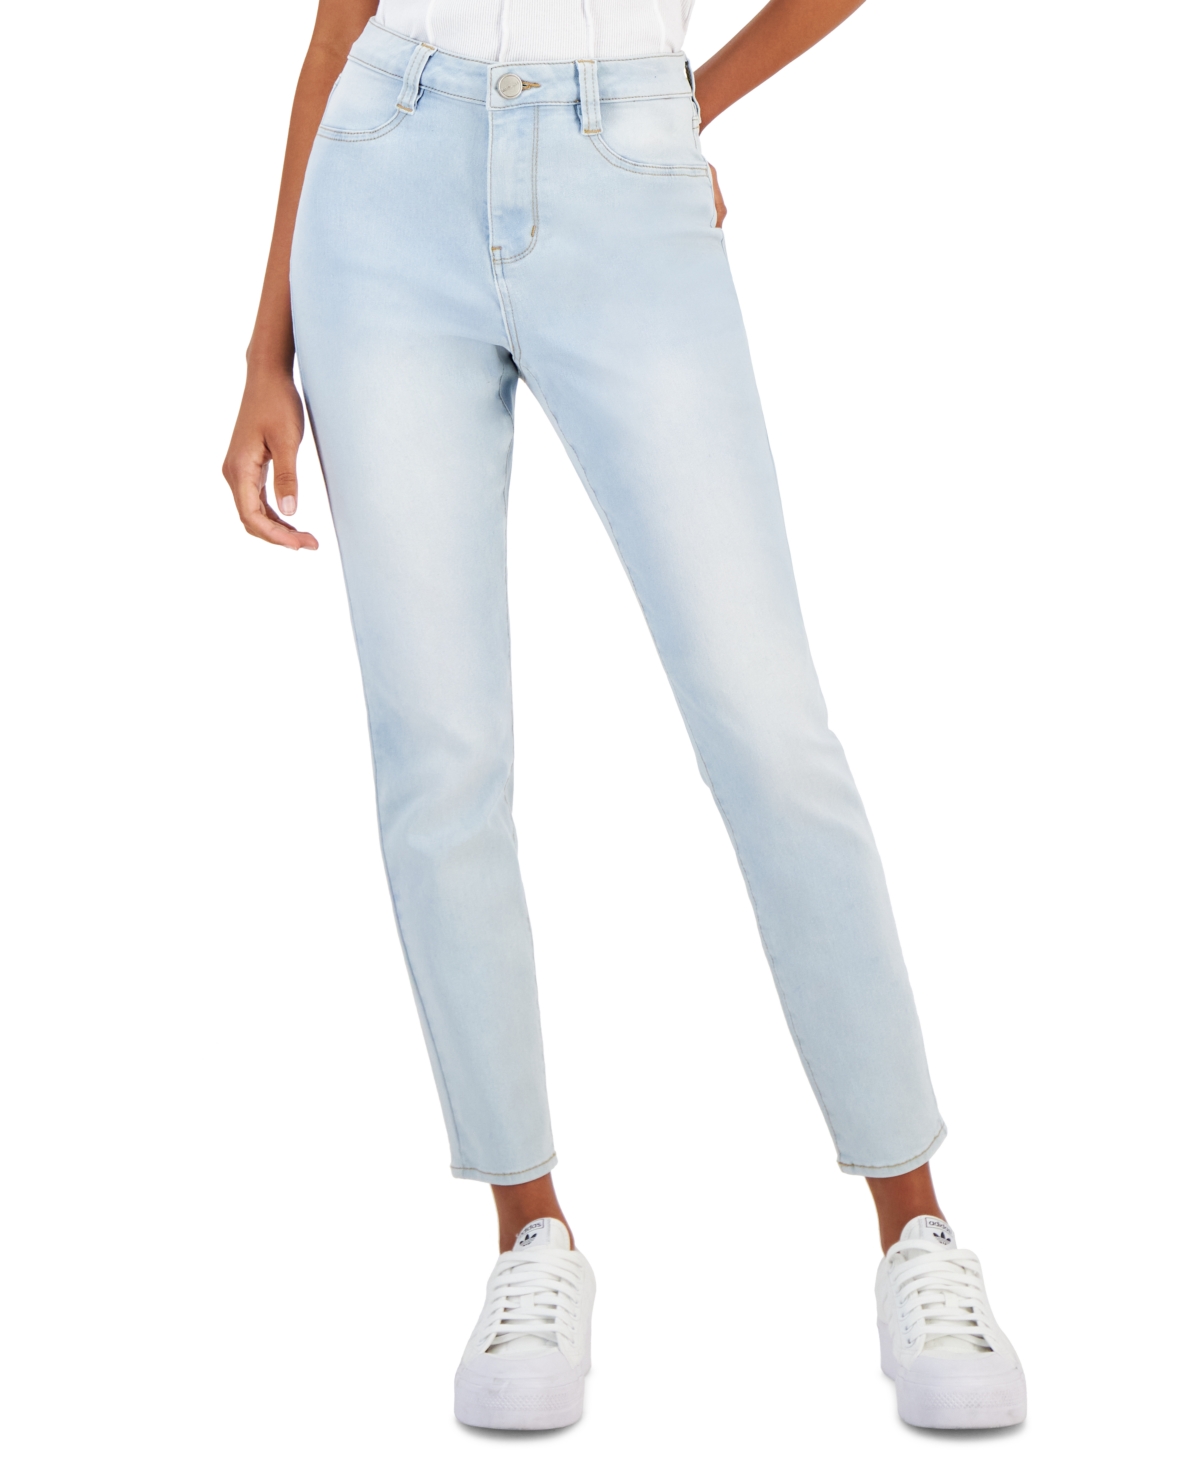 Dollhouse Juniors' Curvy Faded Skinny Jeans In Alps